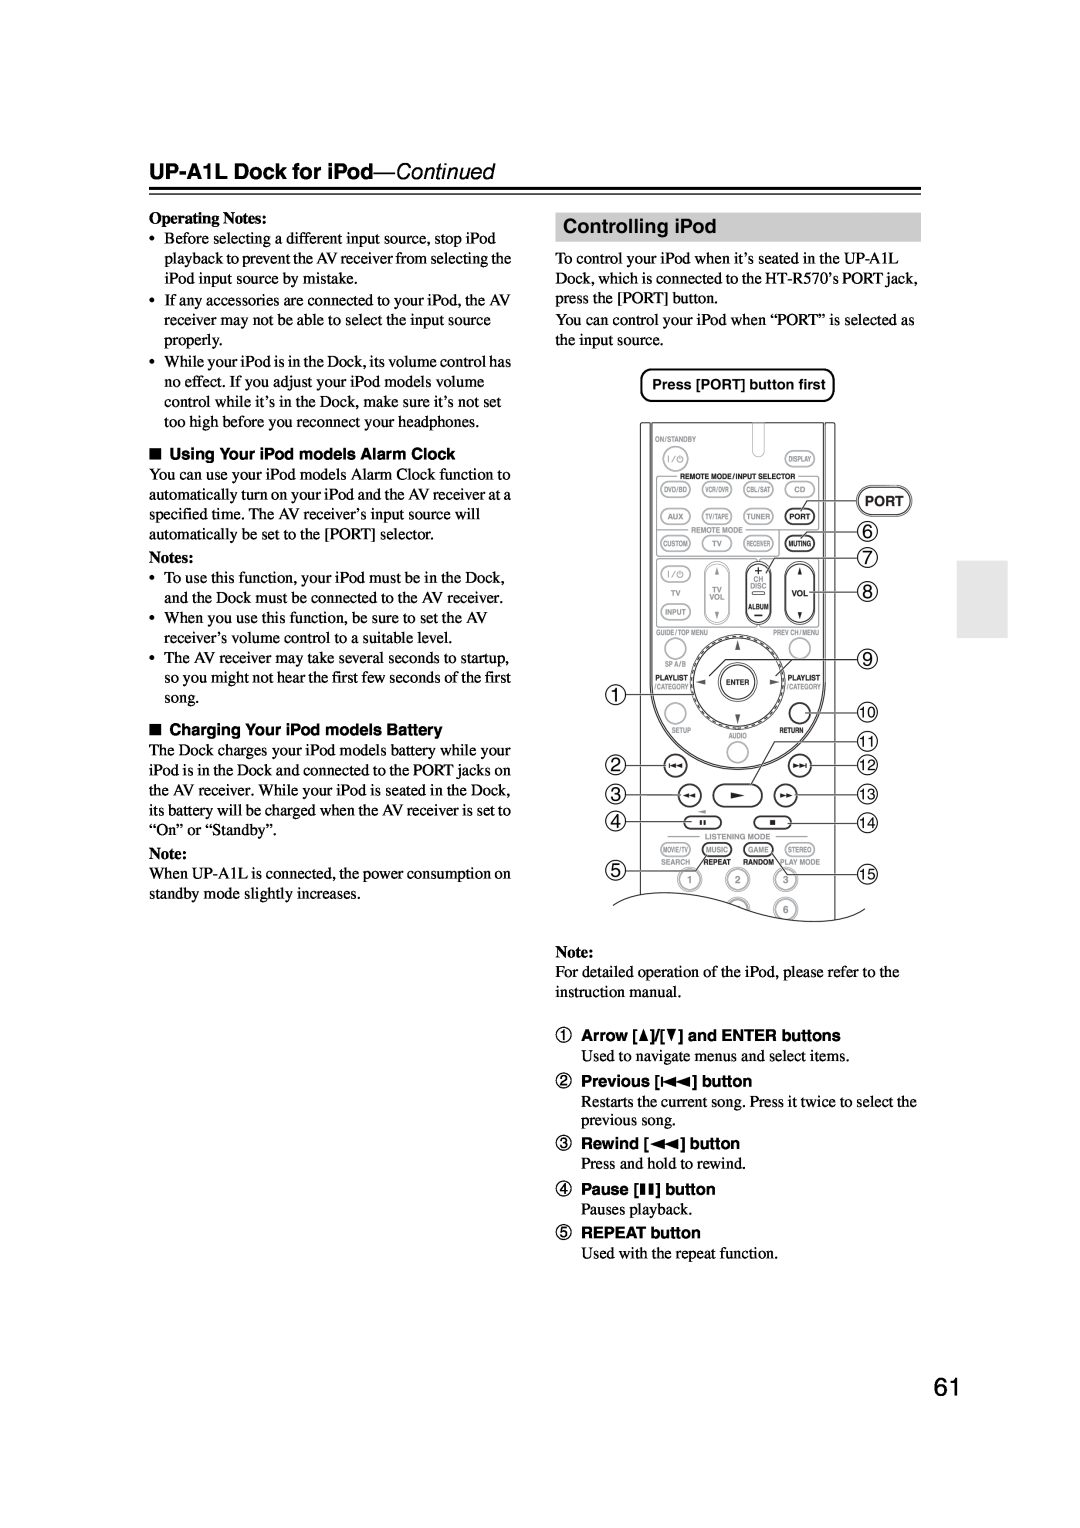 Onkyo 29344934 instruction manual UP-A1LDock for iPod—Continued 